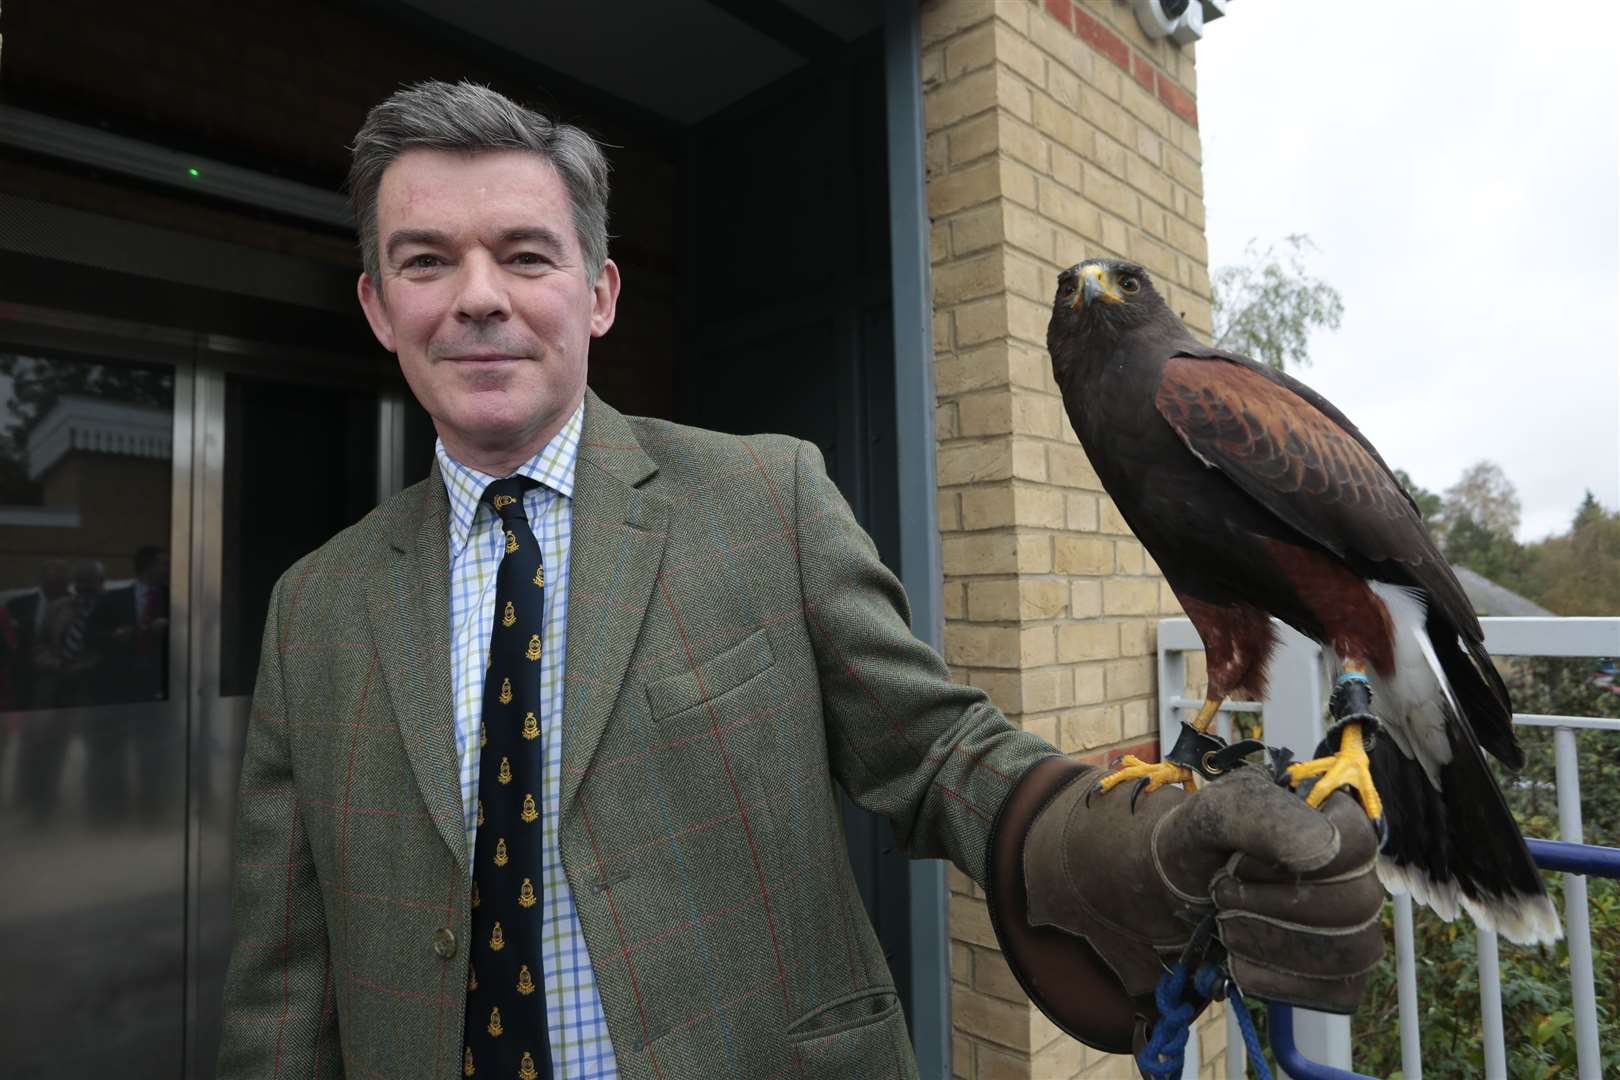 Former MP Hugh Robertson is now chairman of Camelot